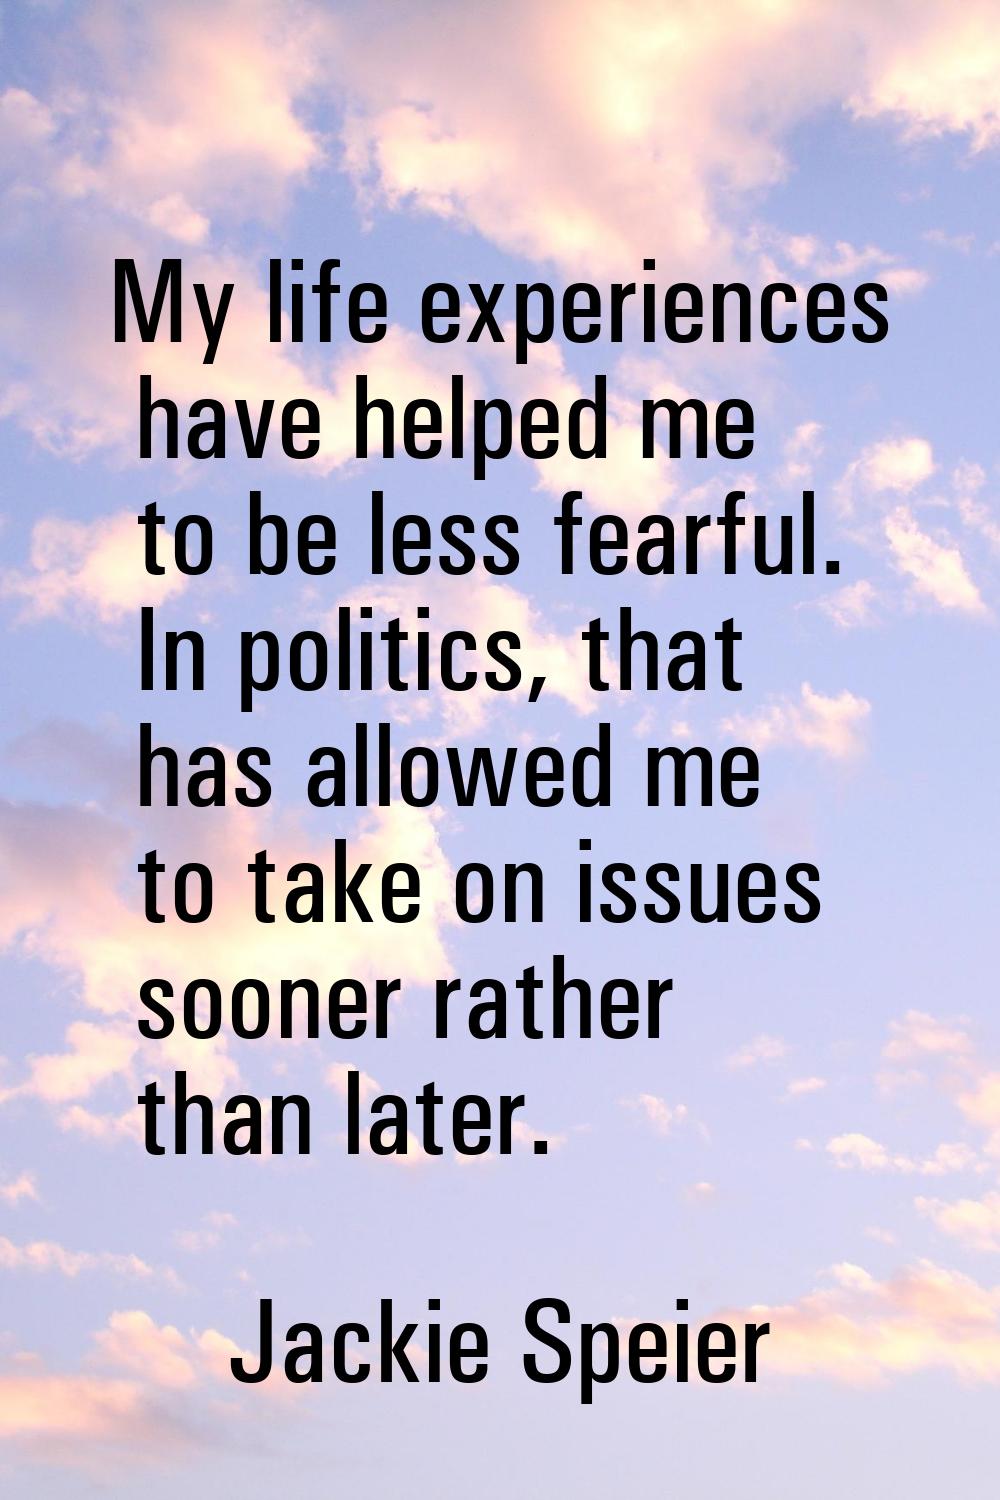 My life experiences have helped me to be less fearful. In politics, that has allowed me to take on 